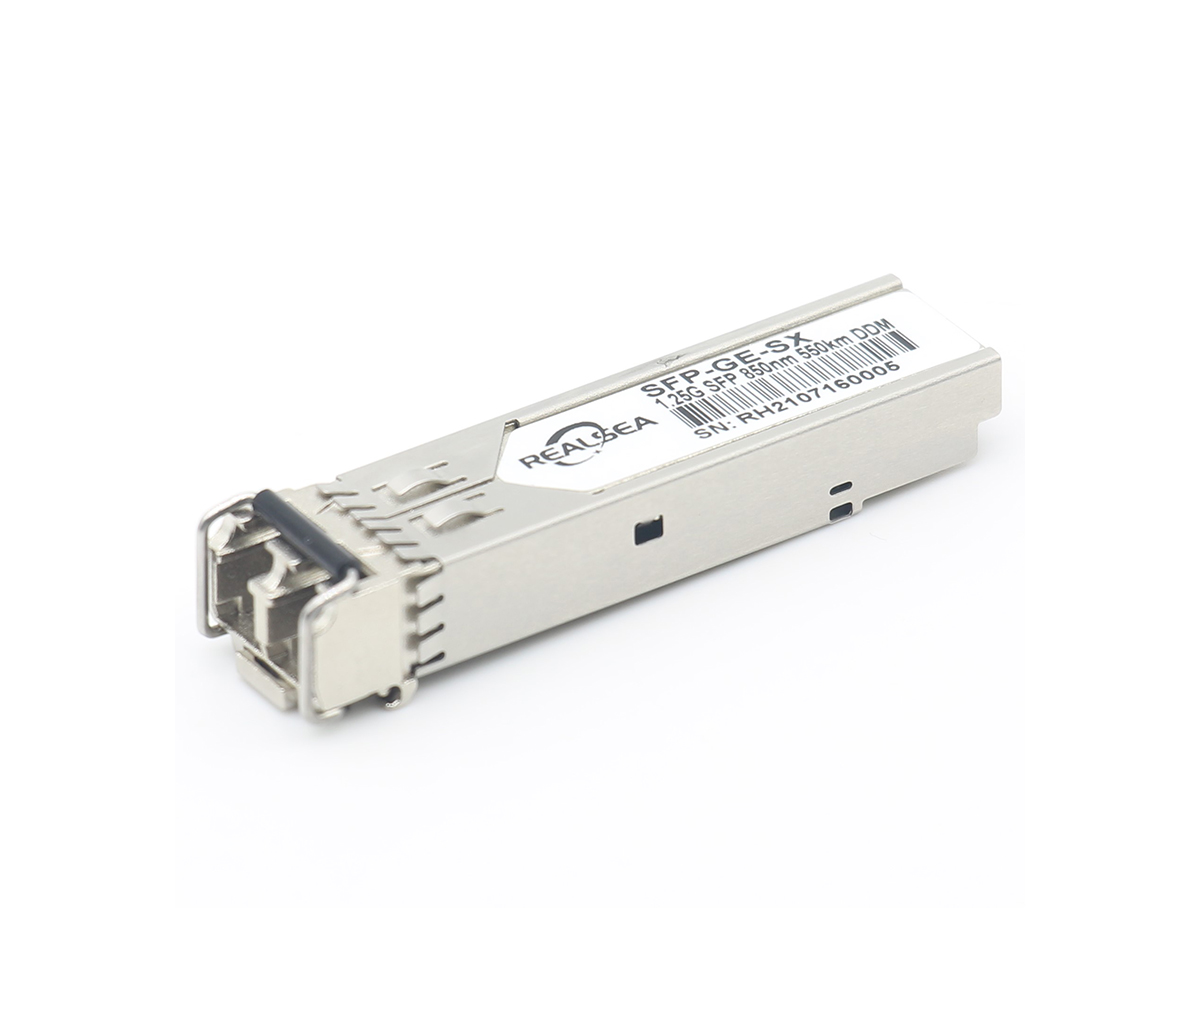 According to the type of fiber optic cable:850nm multimode sfp transceiver